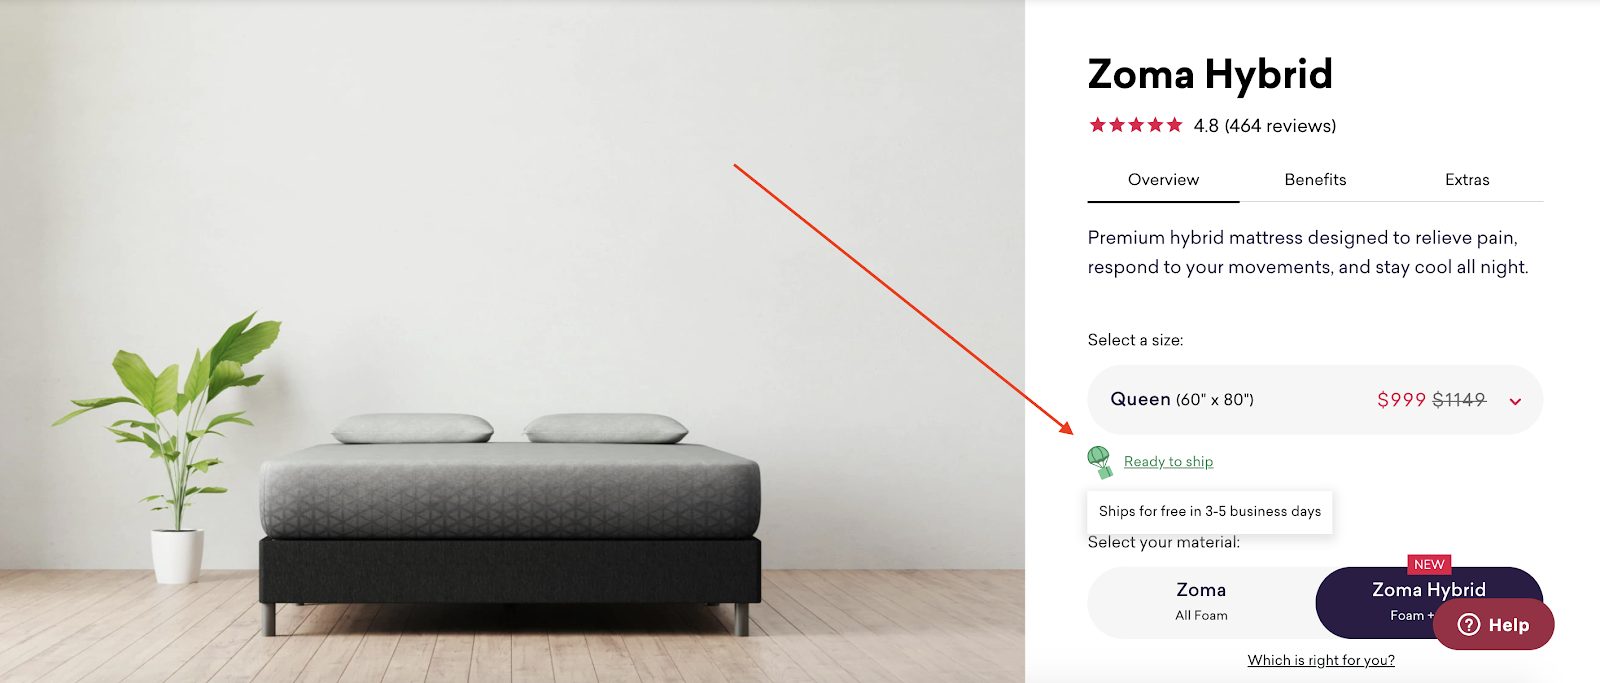 How to Design a Conversation-Optimized Online Shopping Website: Zoma product page